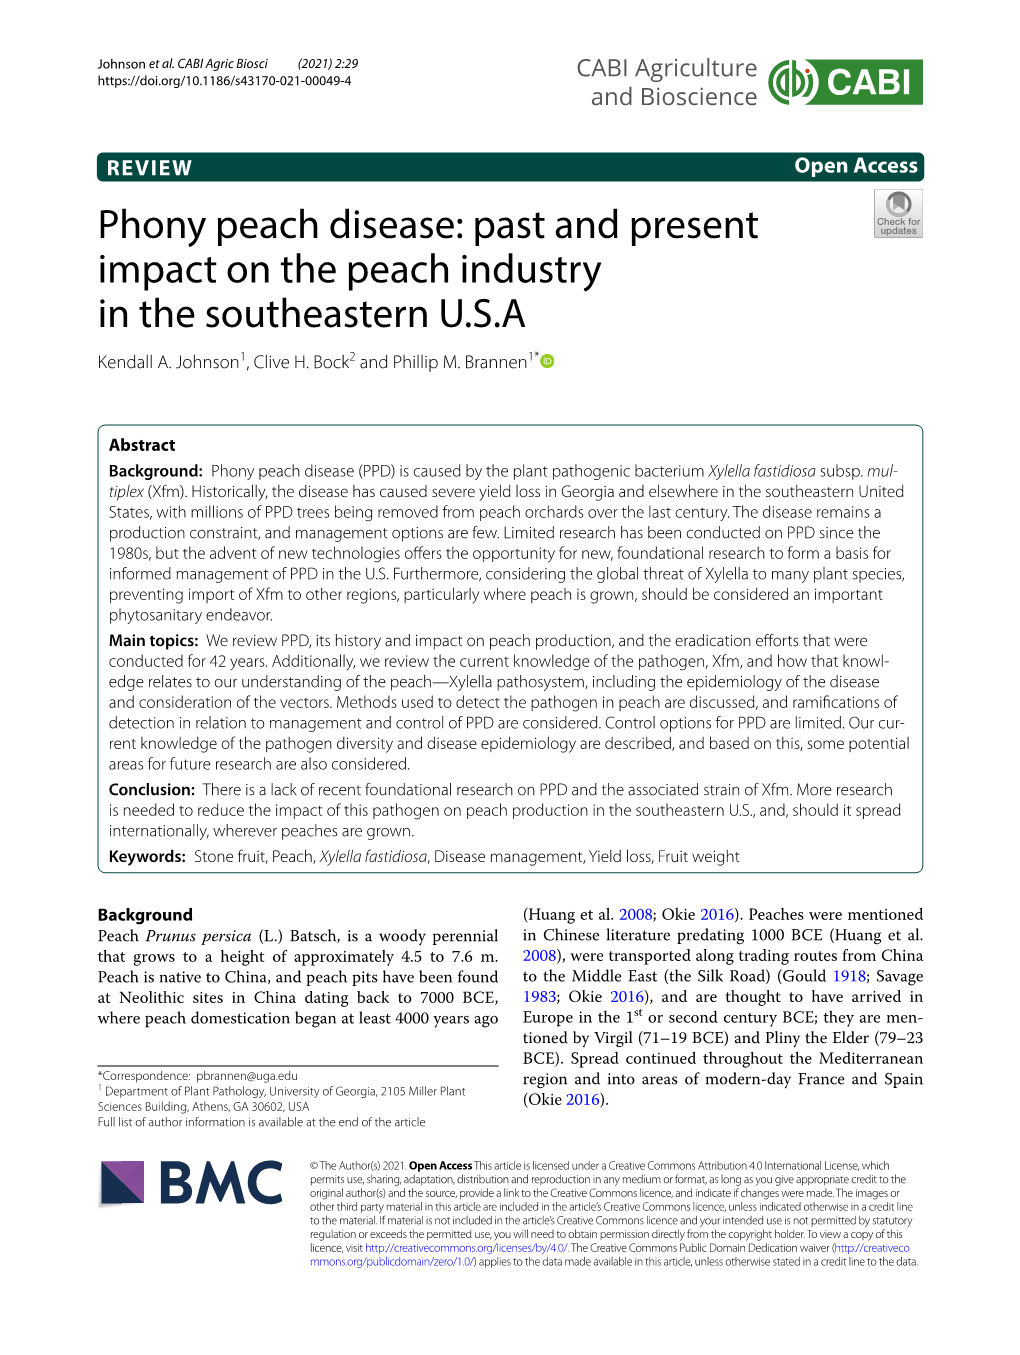 Phony Peach Disease: Past and Present Impact on the Peach Industry in the Southeastern U.S.A Kendall A